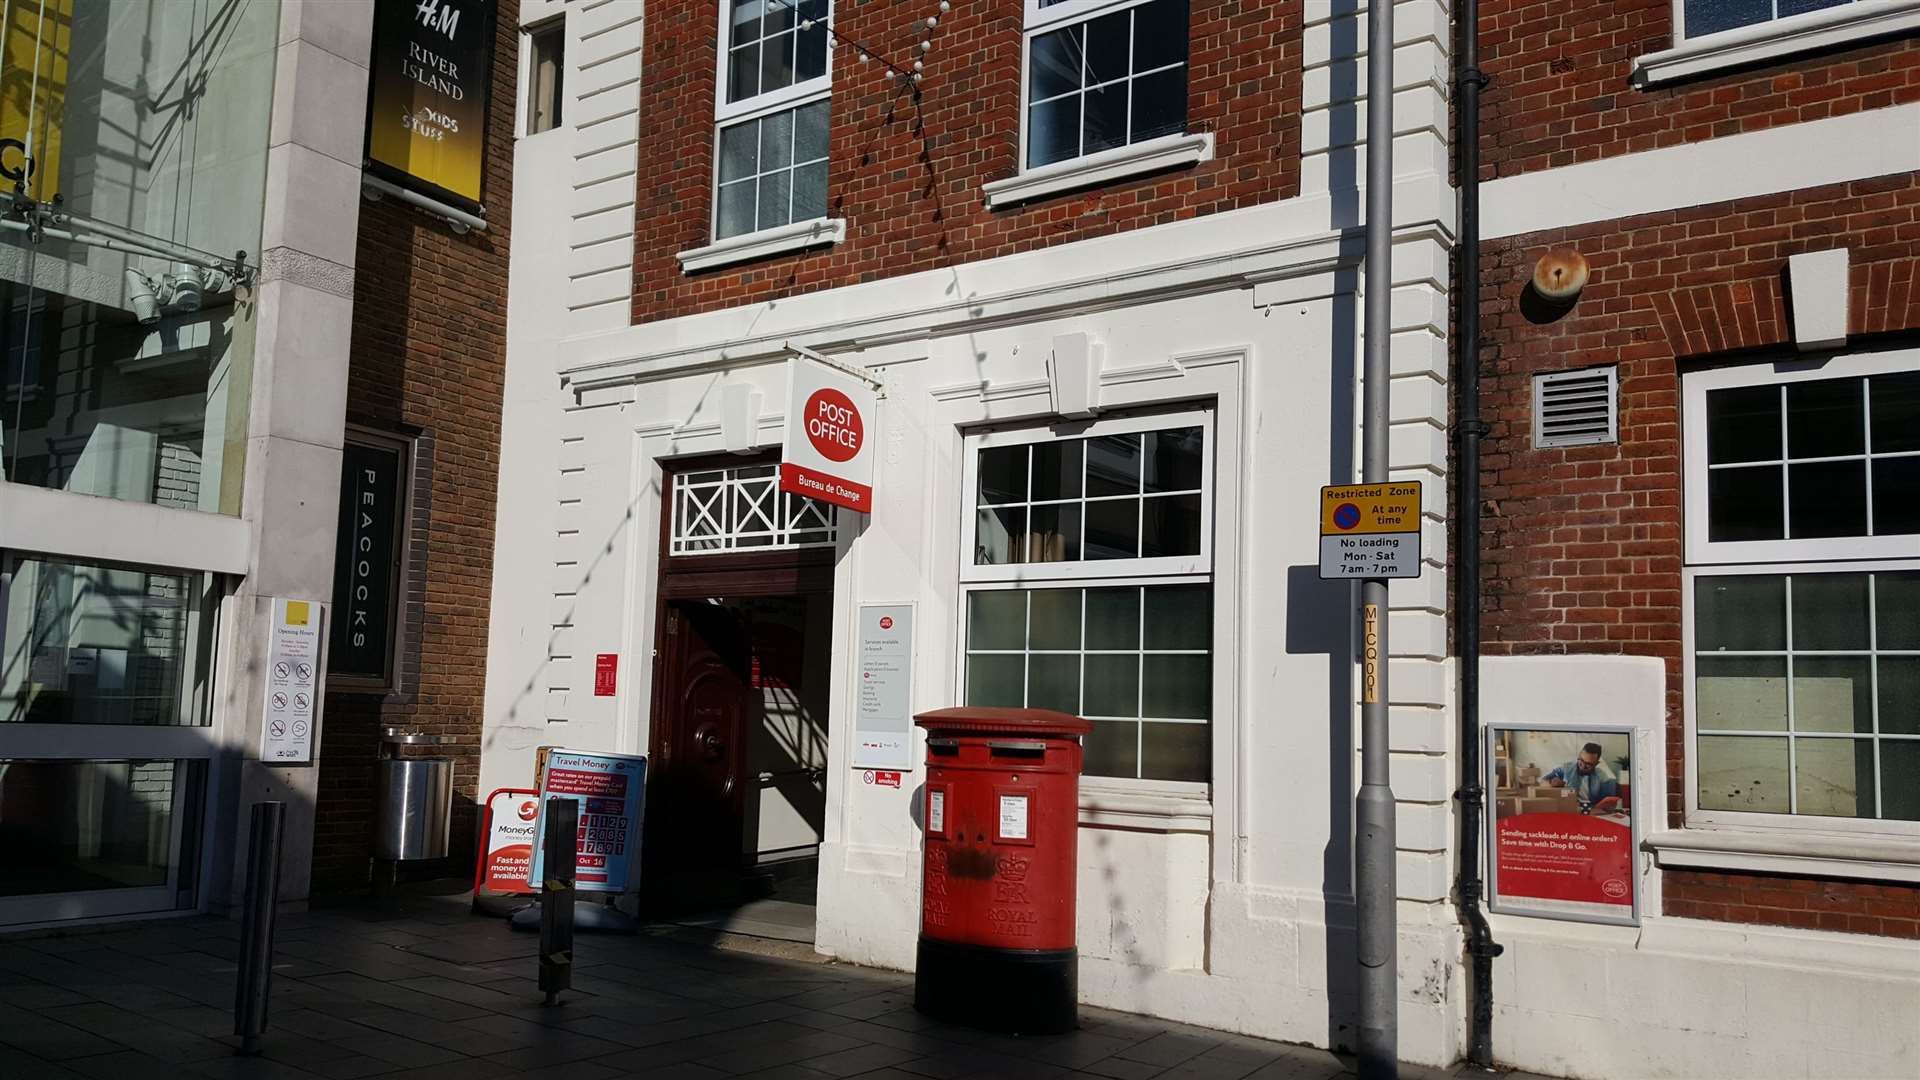 Ashford's post office has been on the market for £800,000